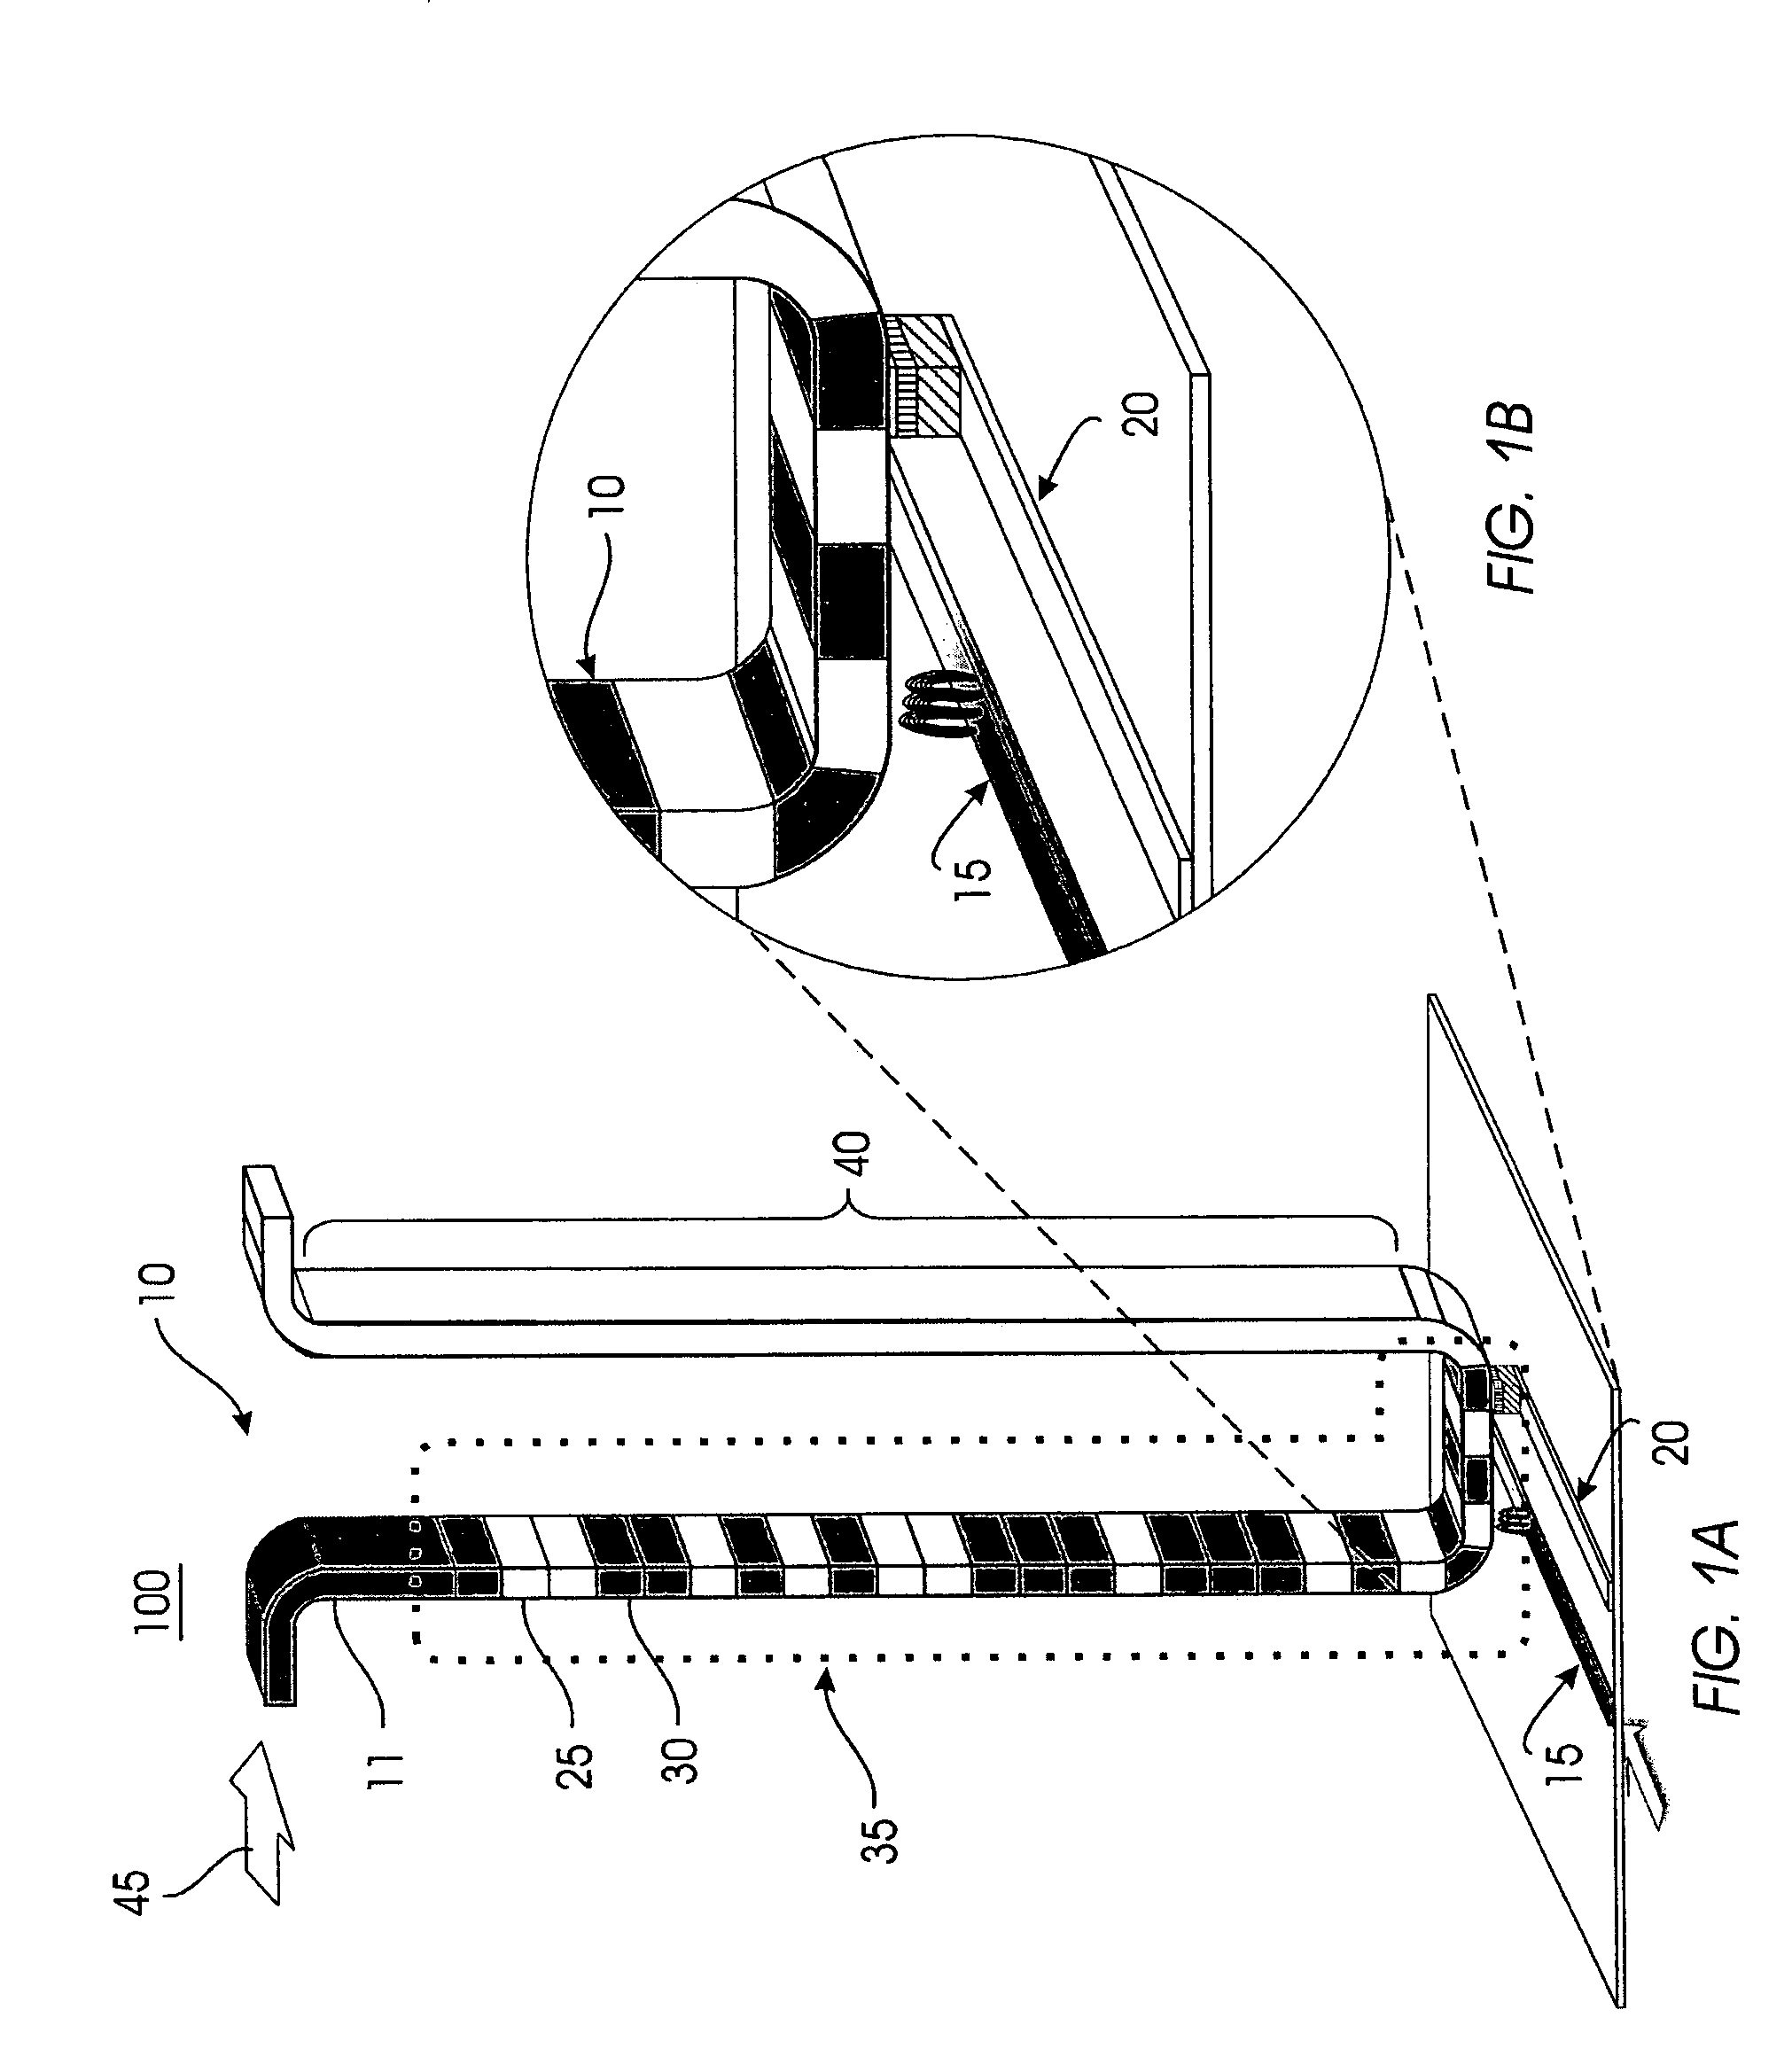 Magnetic shift register with shiftable magnetic domains between two regions, and method of using the same